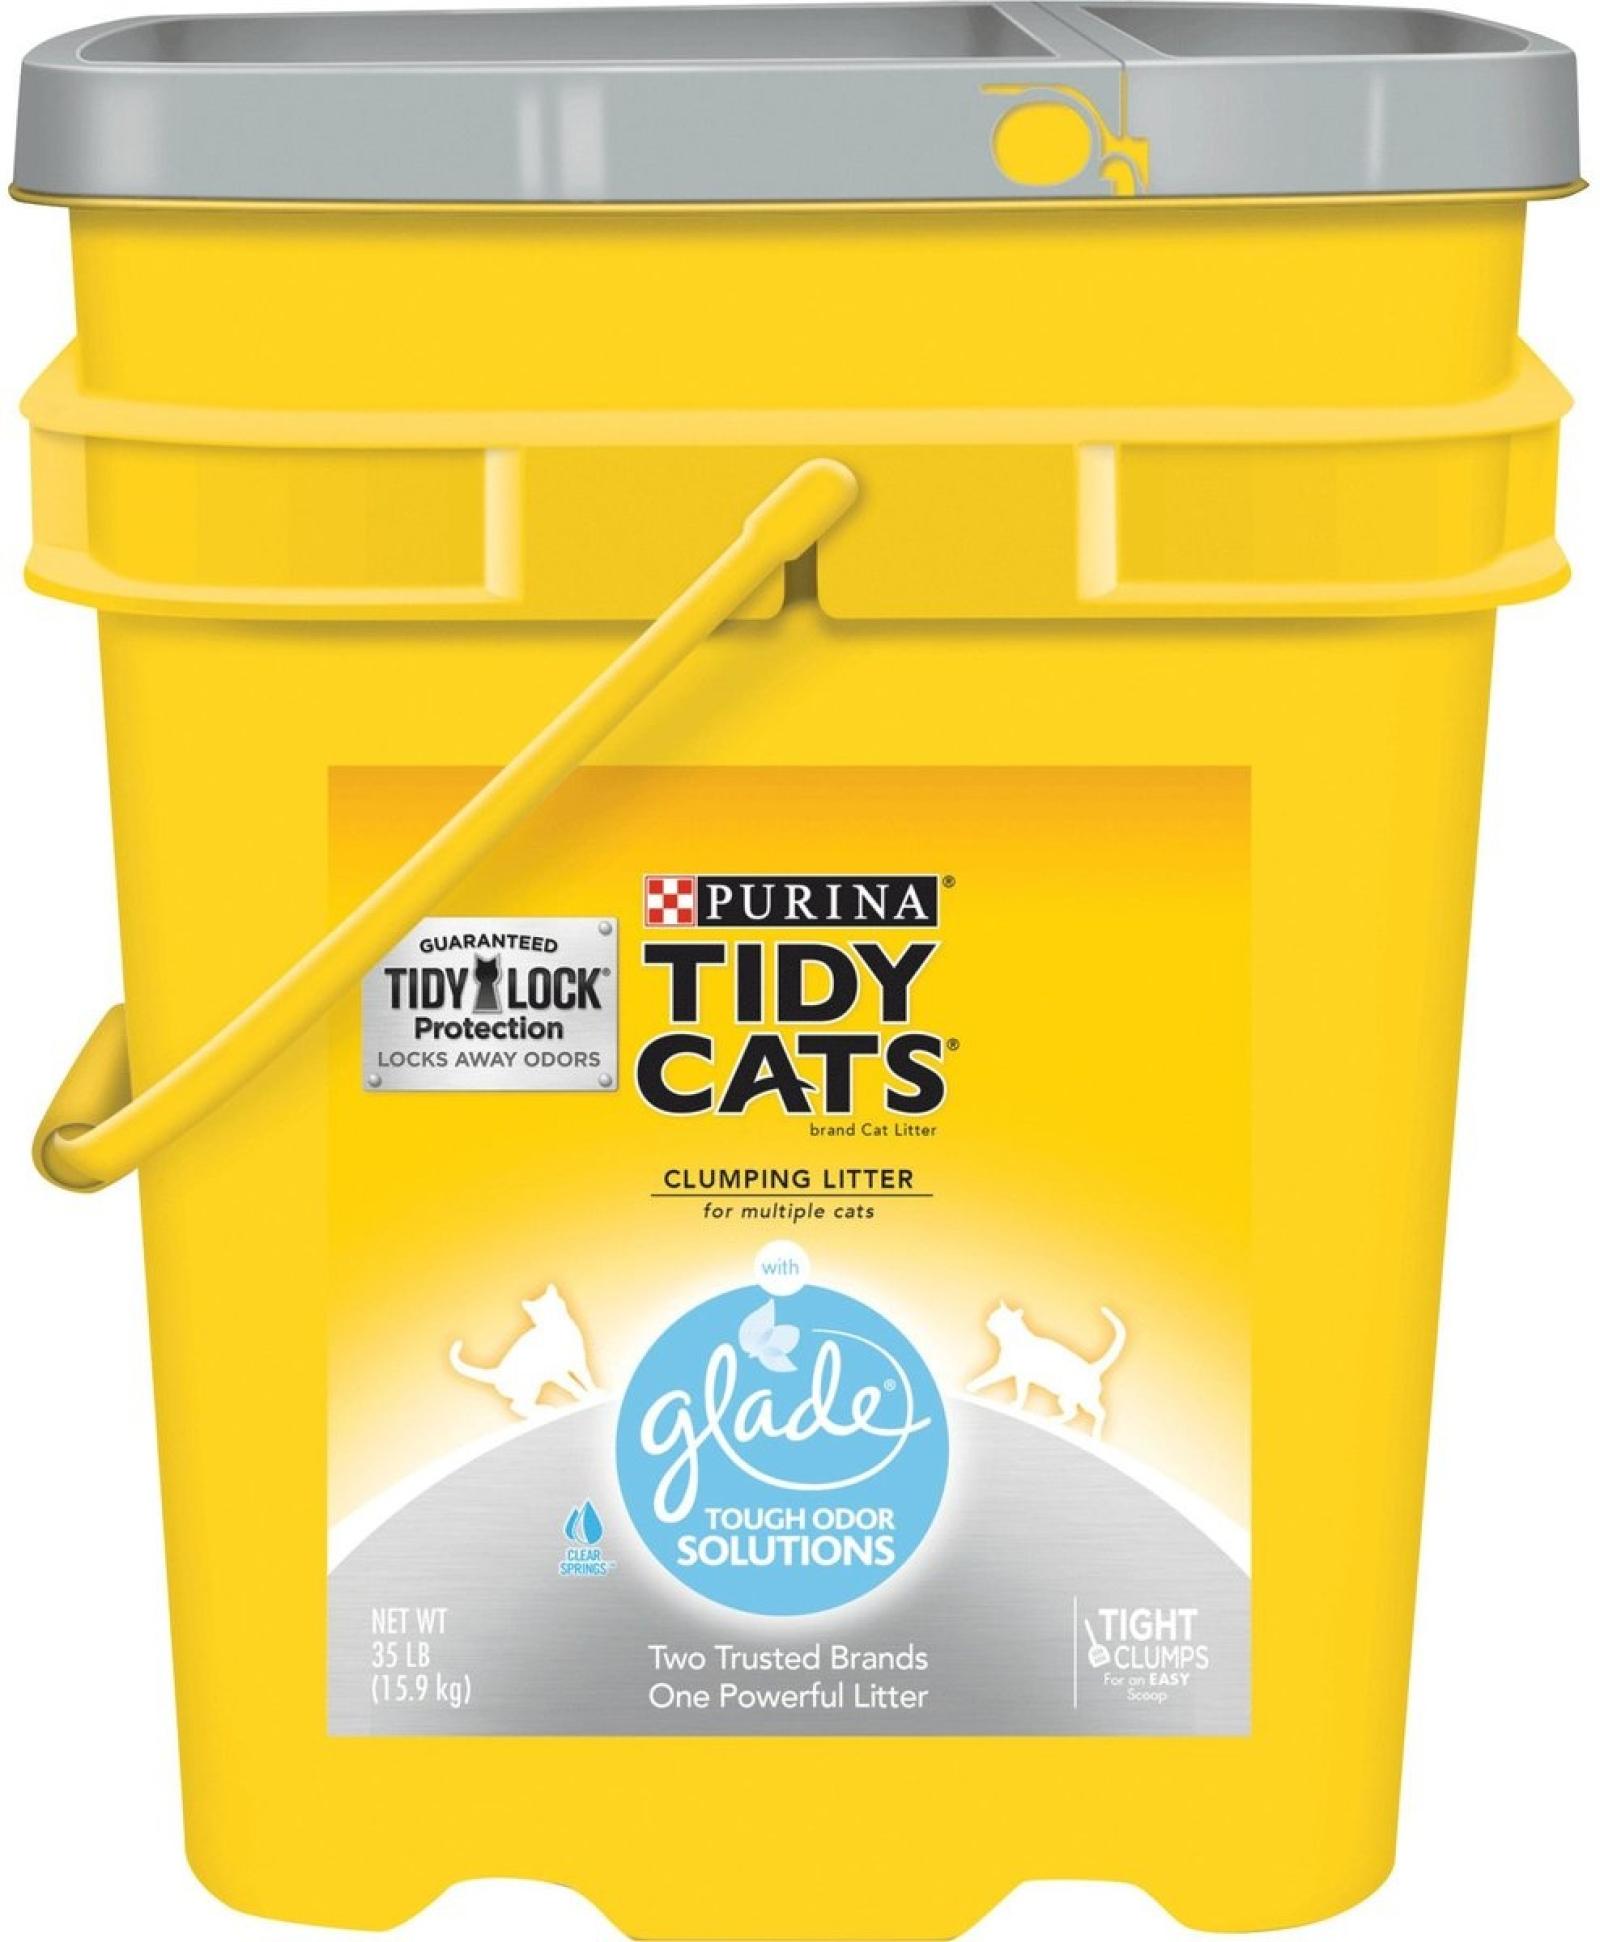 Purina Tidy Cats Multi-Cat Clumping Litter with Glade